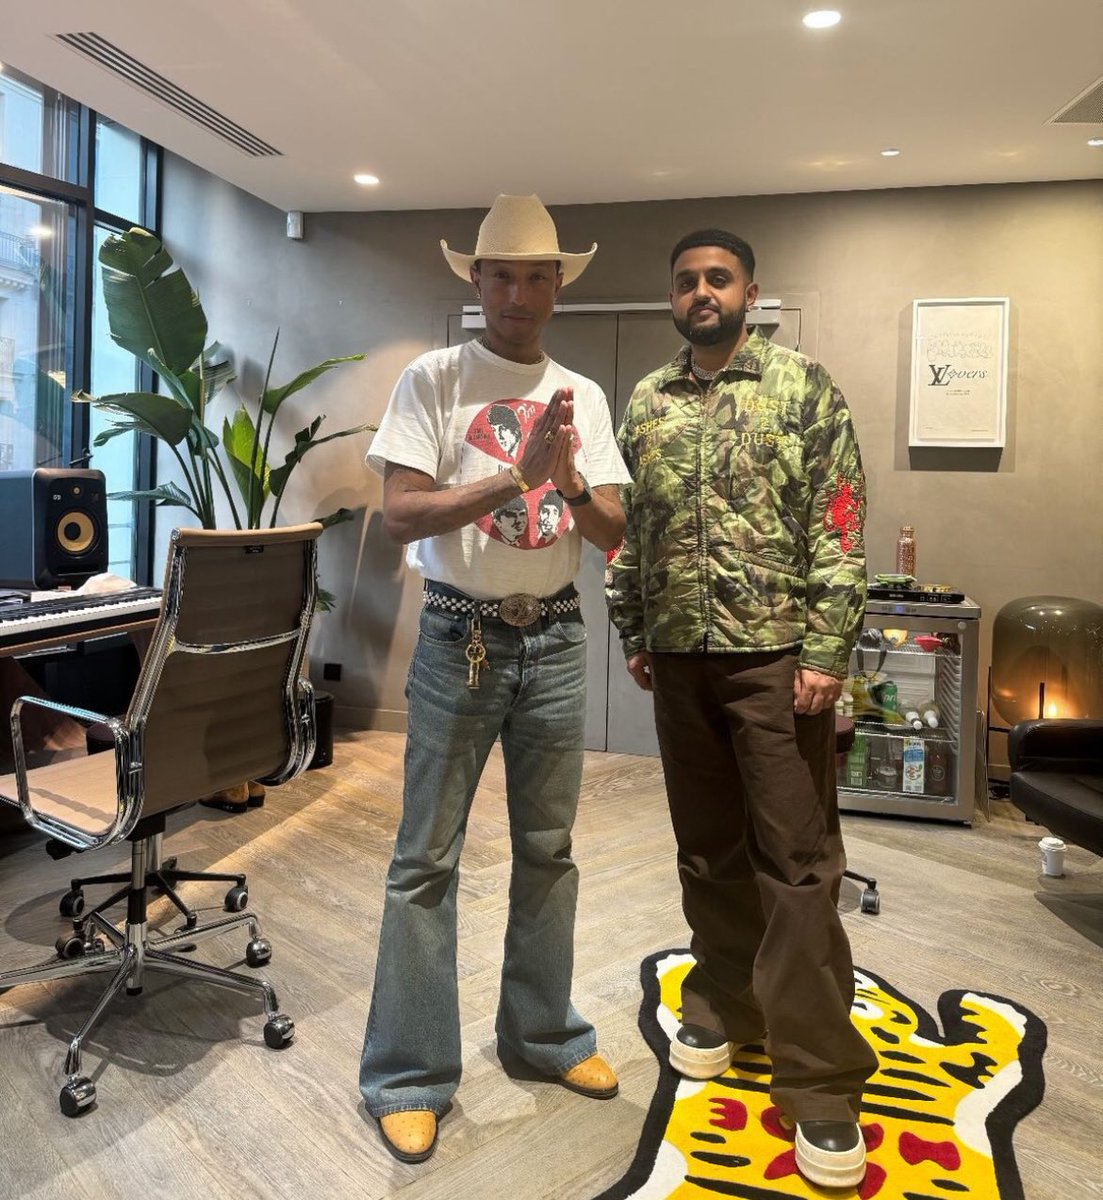 NAV x Pharrell Williams working on new music at the LV office 👀 'On My Way 2 Rexdale' drops this summer — teased features include: ▫️Playboi Carti ▫️Travis Scott ▫️Future ▫️Young Thug ▫️Don Toliver ▫️Metro Boomin